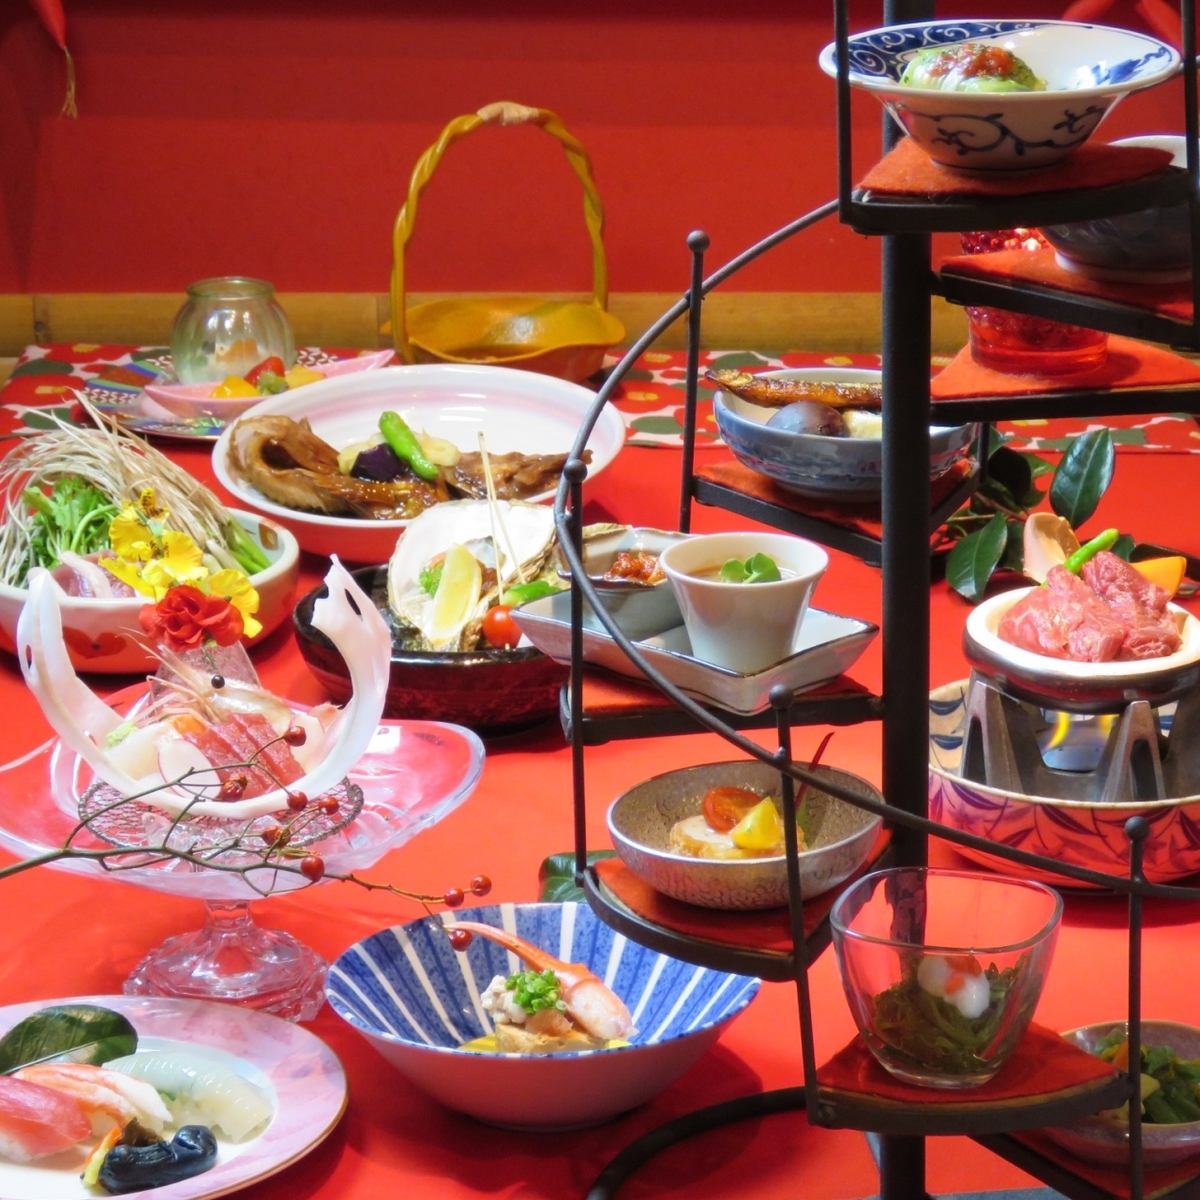 A popular restaurant near the east exit of Sendai Station! Enjoy local cuisine in a private room at a reasonable price!